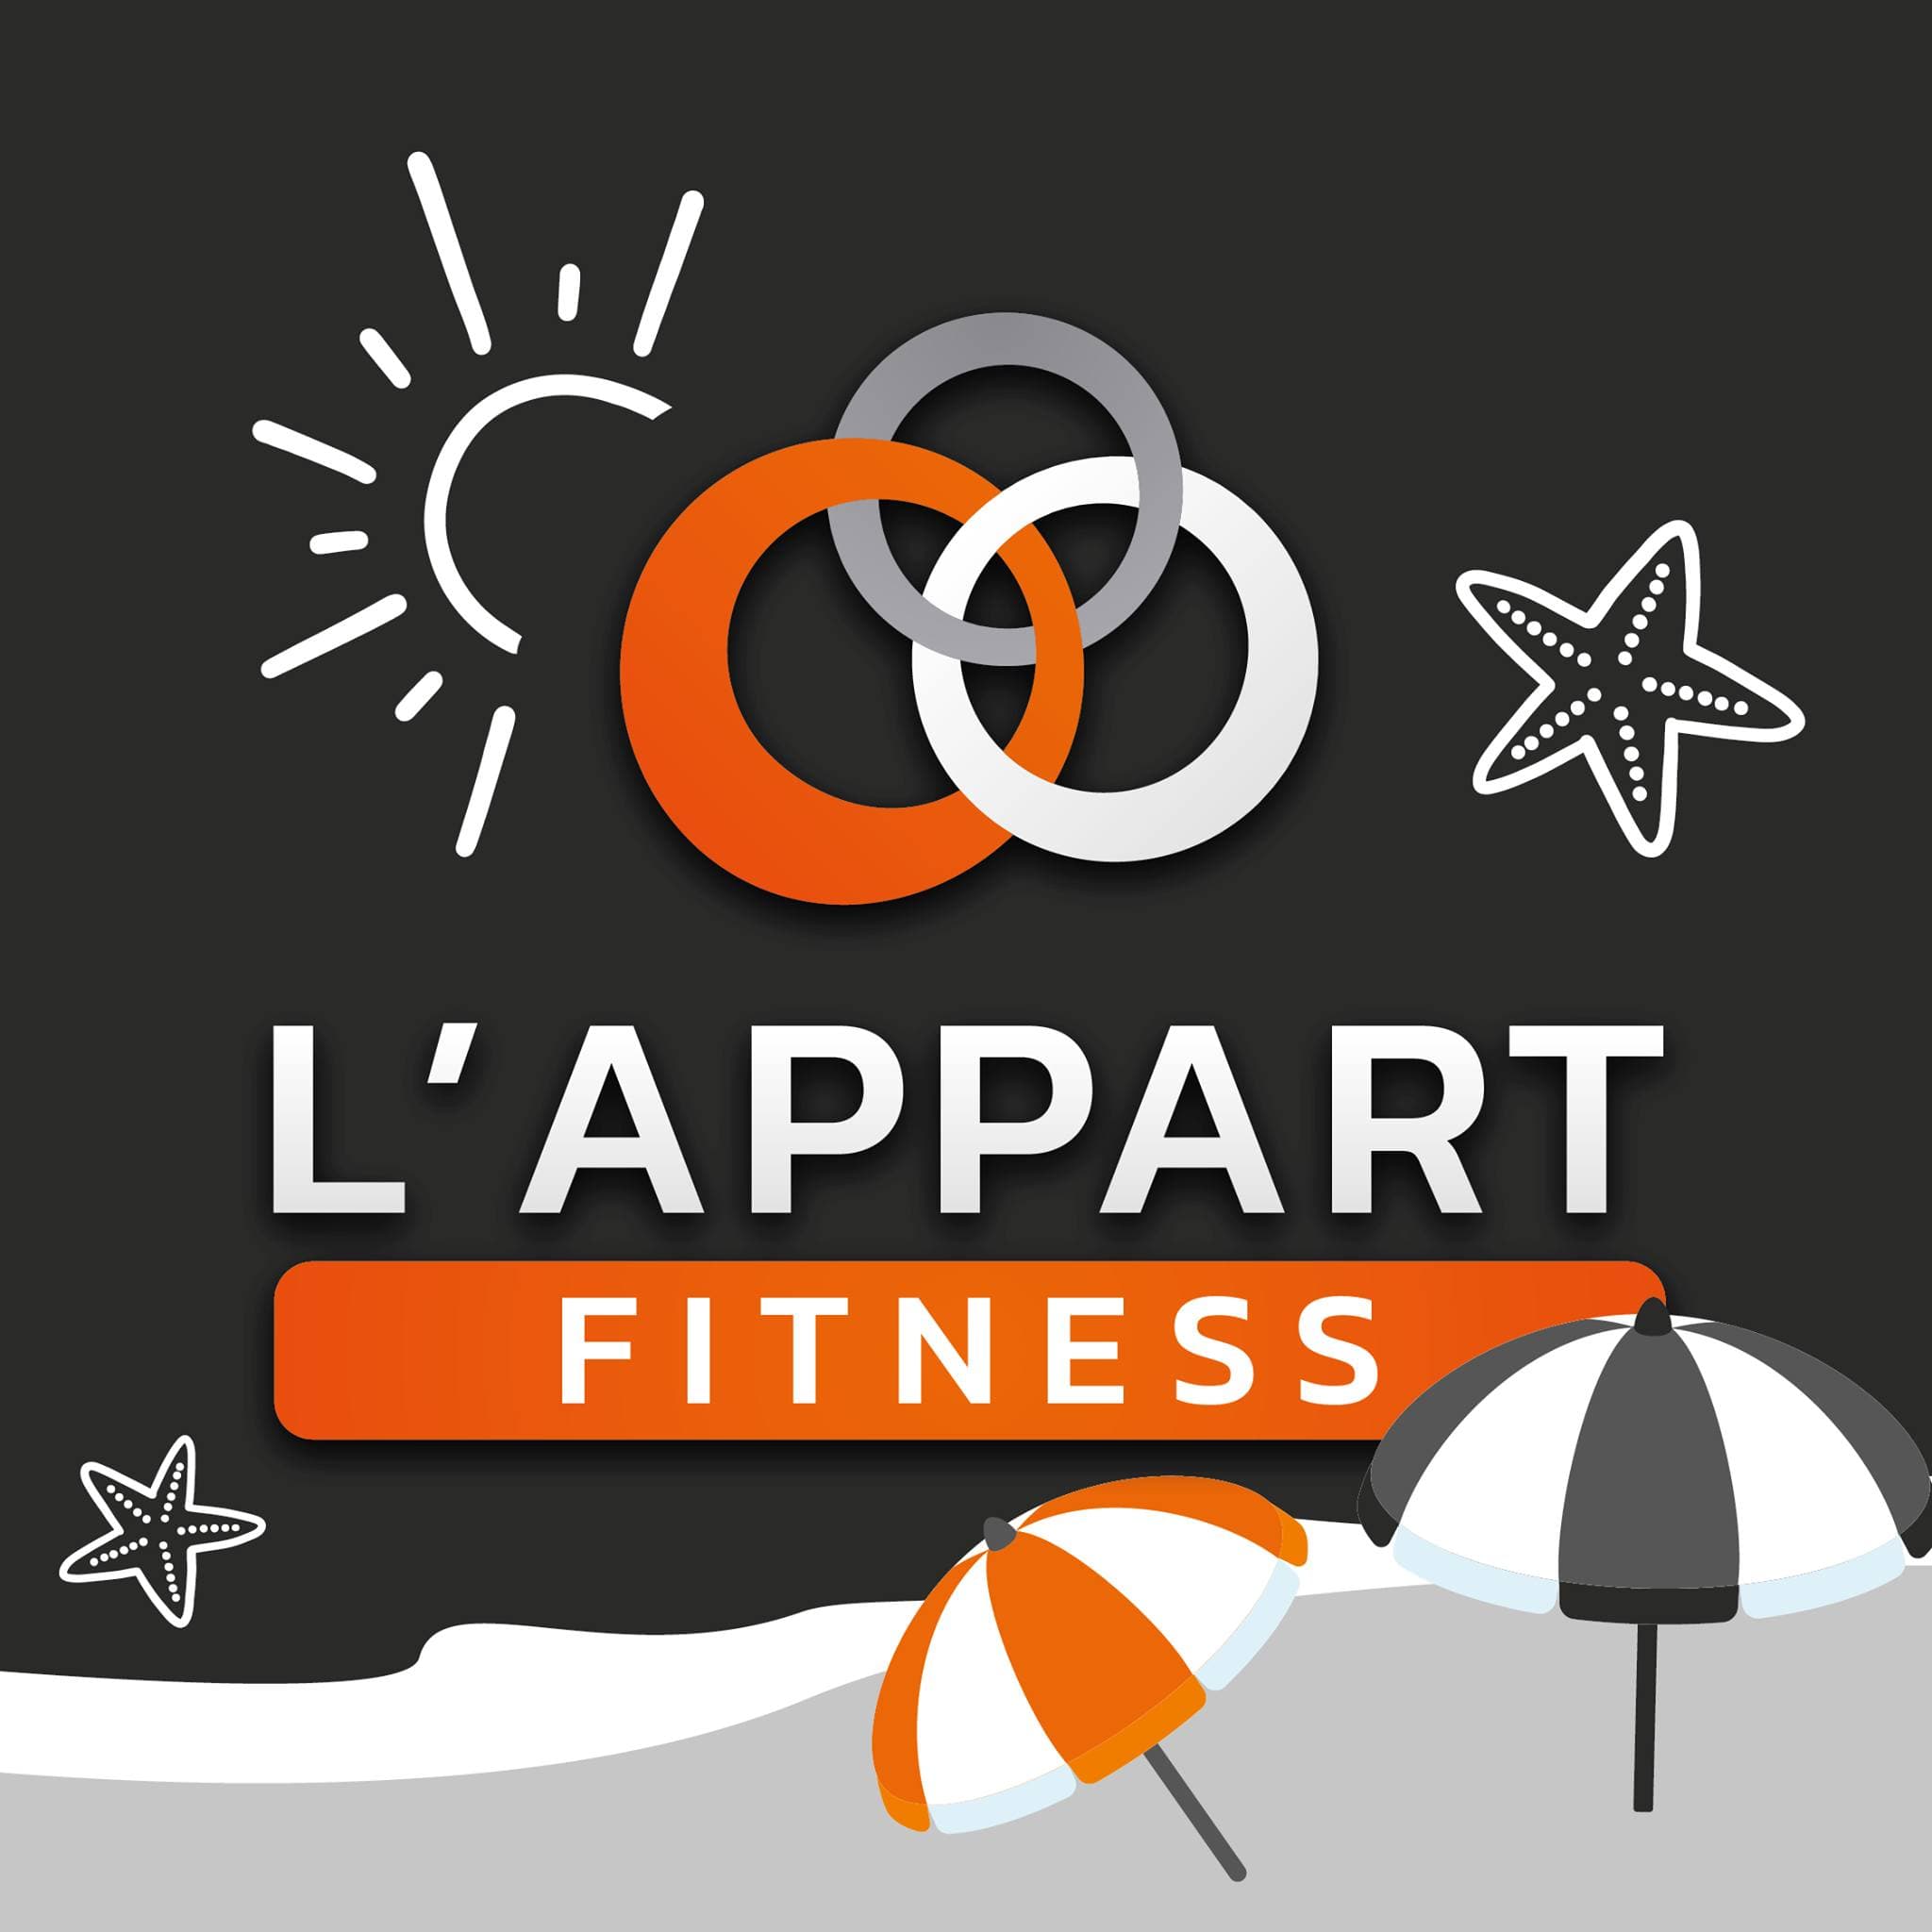 Icone App L'Appart Fitness Talence